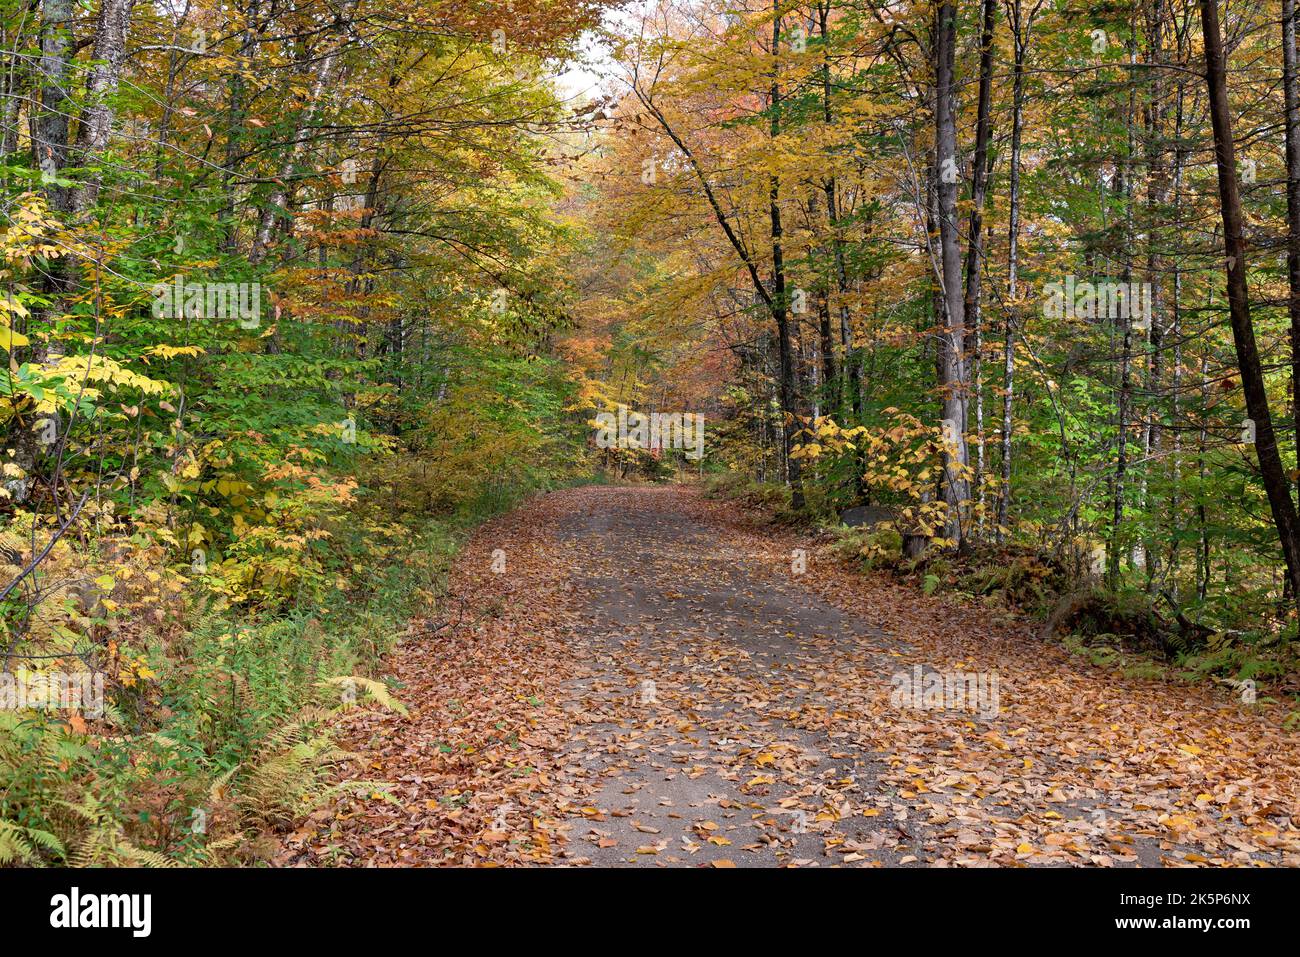 A wilderness logging road in the Adirondack Mountains, NY USA in autumn with leaves turning colors Stock Photo